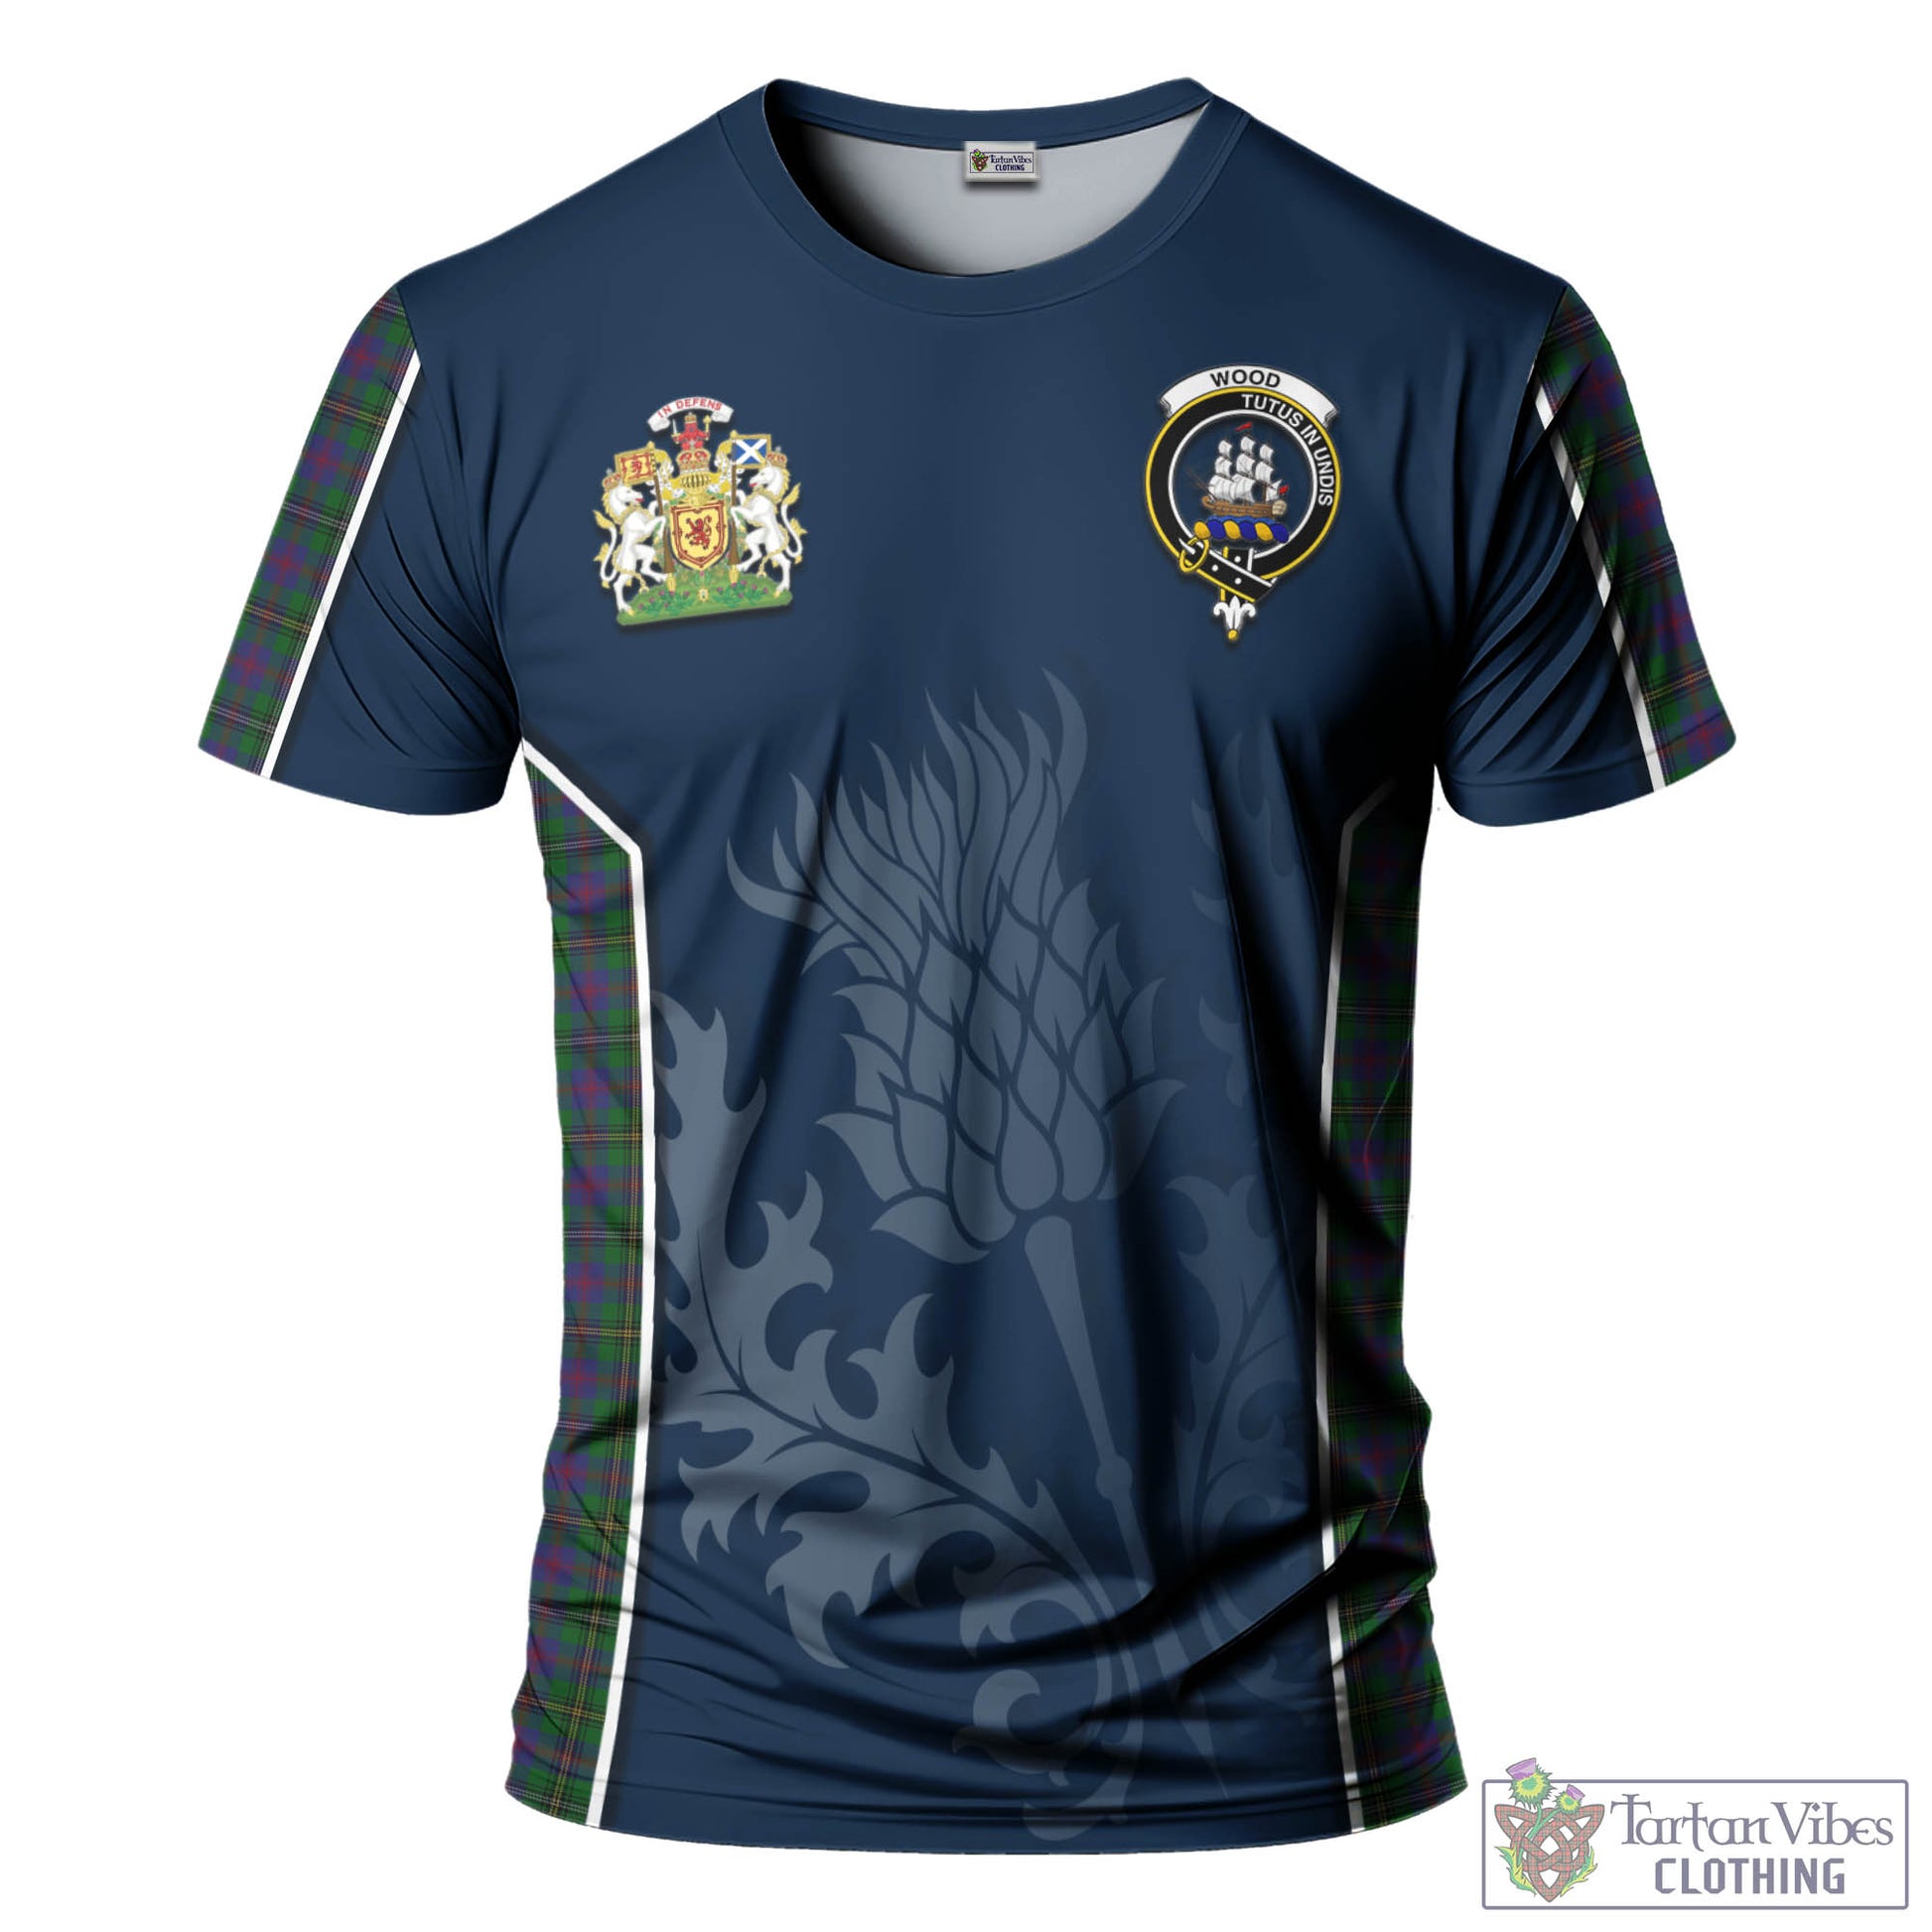 Tartan Vibes Clothing Wood Tartan T-Shirt with Family Crest and Scottish Thistle Vibes Sport Style